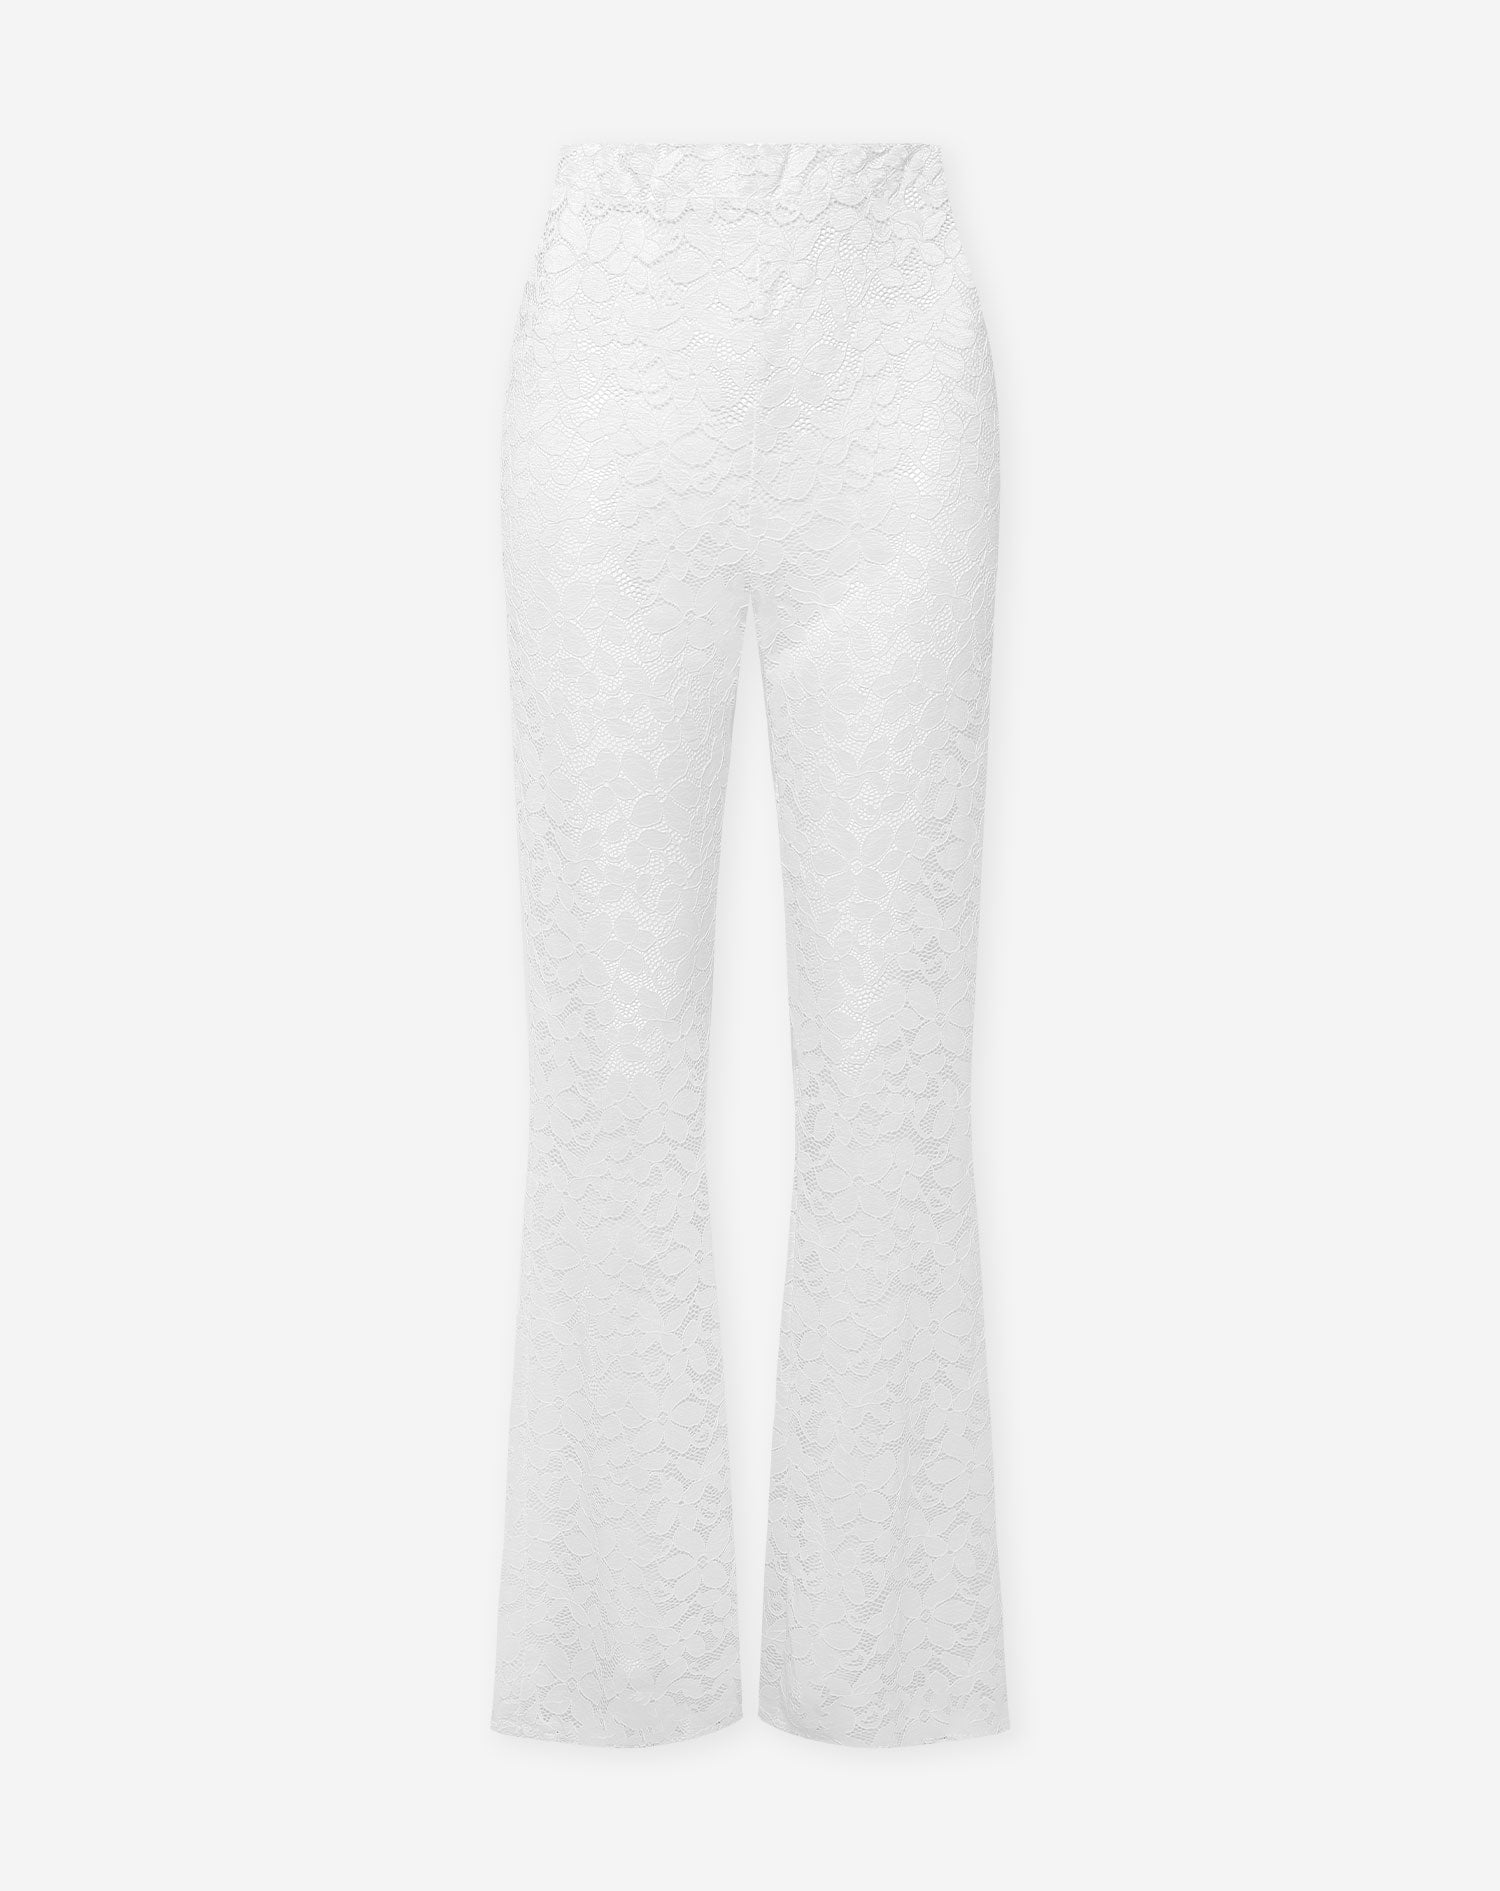 FLOWER LACE FLARED PANTS WHITE